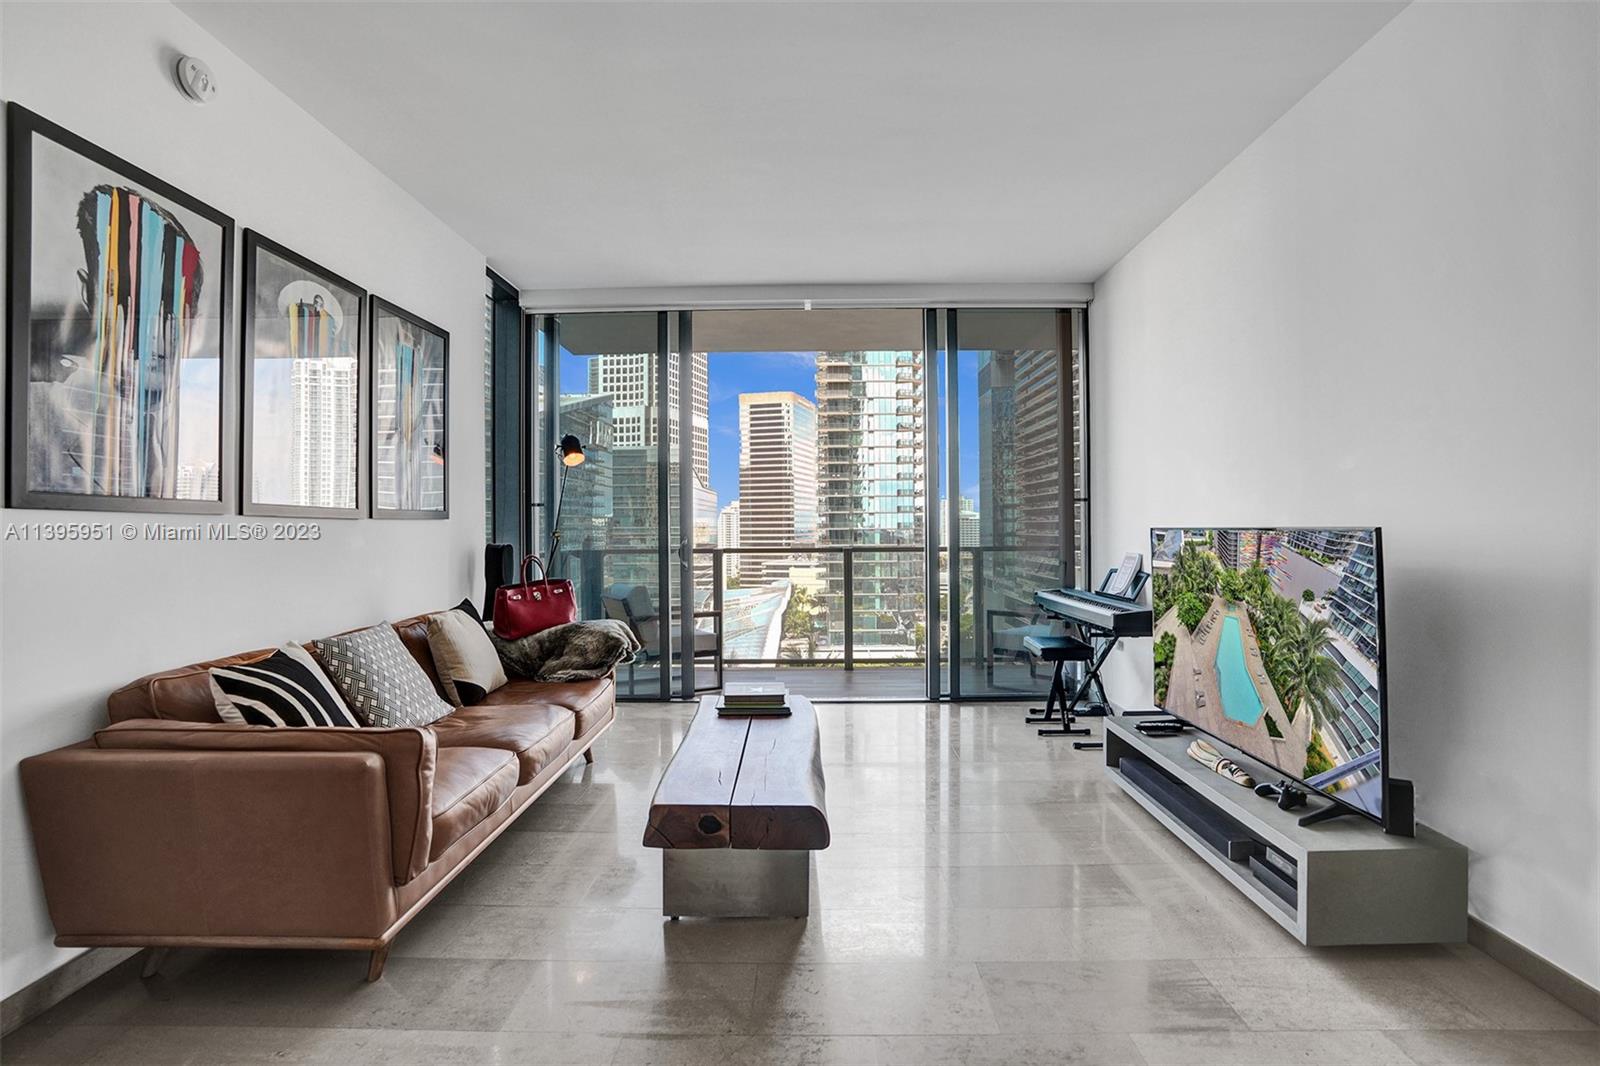 The best of South Florida, right at your doorstep. Acting as a direct extension of Brickell City Centre, Rise provides its residents with easy access to a variety of shops, restaurants and bars & is one of the most sought-after places to live in Miami. This stunning 2 bed/2.5 bath unit features high ceilings & floor to ceiling glass doors throughout, filling the space with natural light, creating a bright and inviting ambiance. The modern open kitchen is a chef's dream, equipped with Bosch appliances, Italian cabinetry, a wine cooler, and ample storage. Both bedrooms feature beautiful en suite bathrooms, oversized walk-in closets with built-ins, & black-out shades. The spacious terrace is the perfect place to unwind and take in the unparalleled views of the city skyline and Miami River.